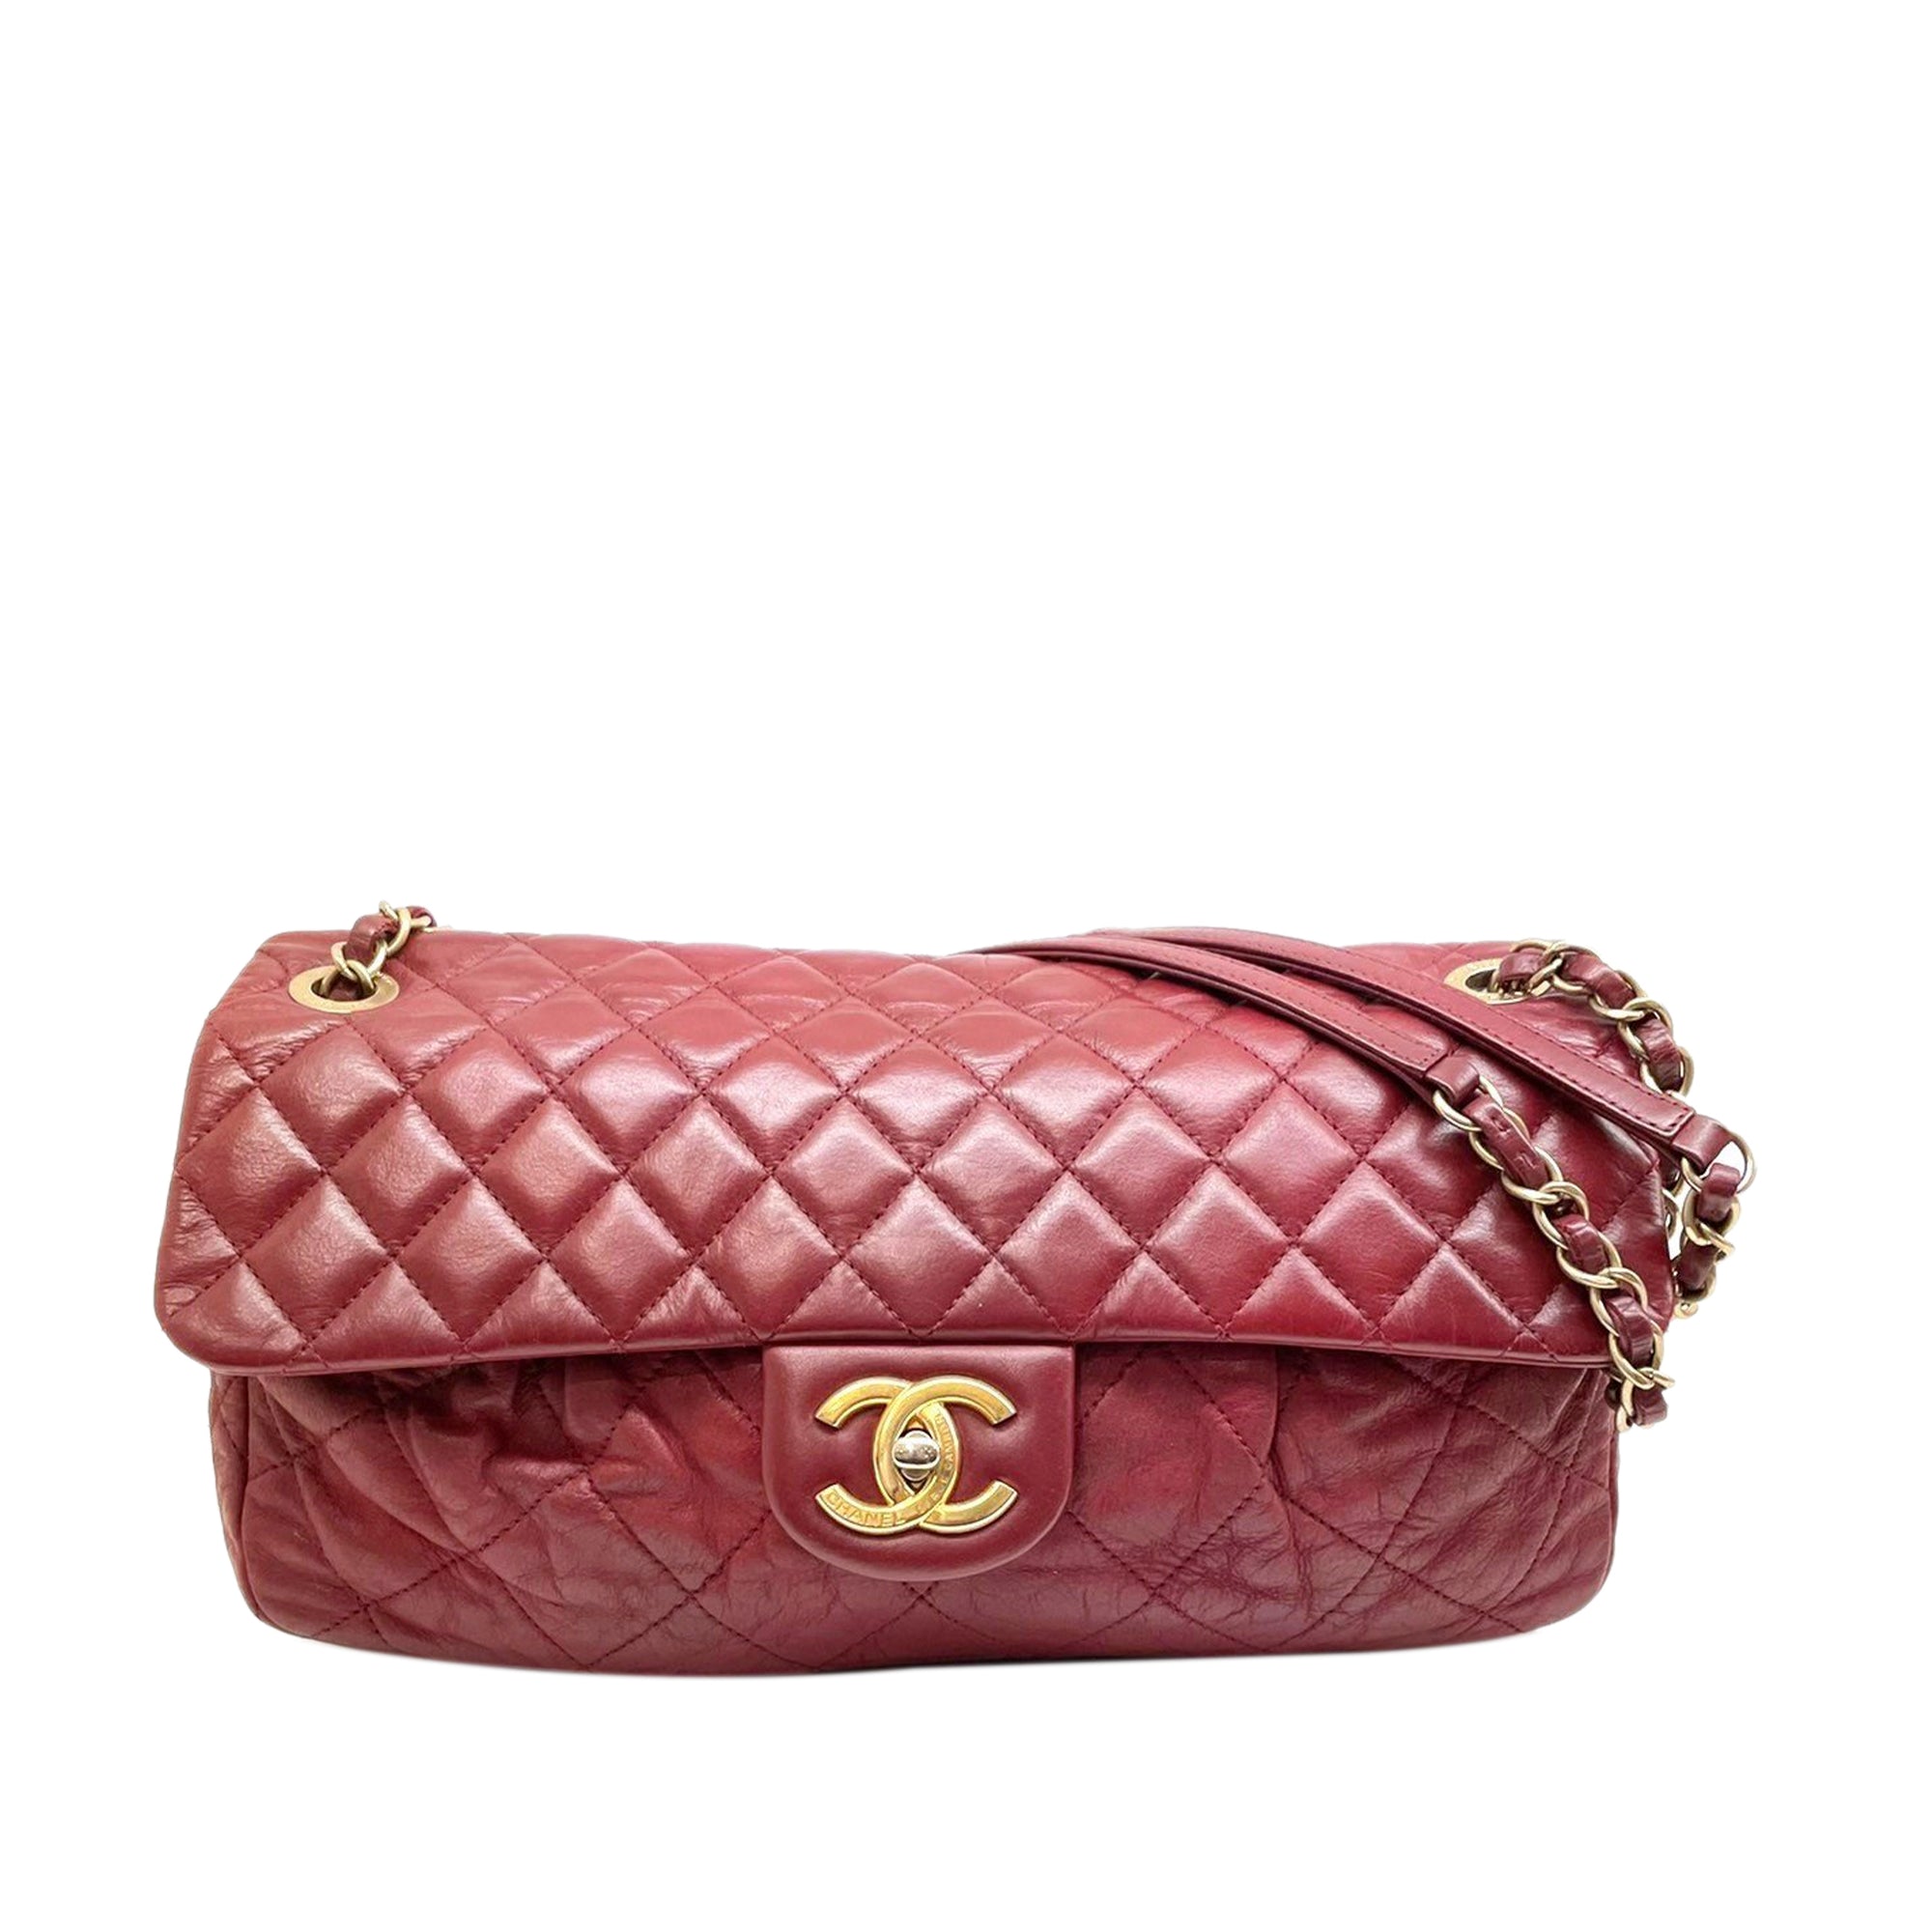 Chanel - Authenticated Timeless/Classique Handbag - Leather Red for Women, Good Condition